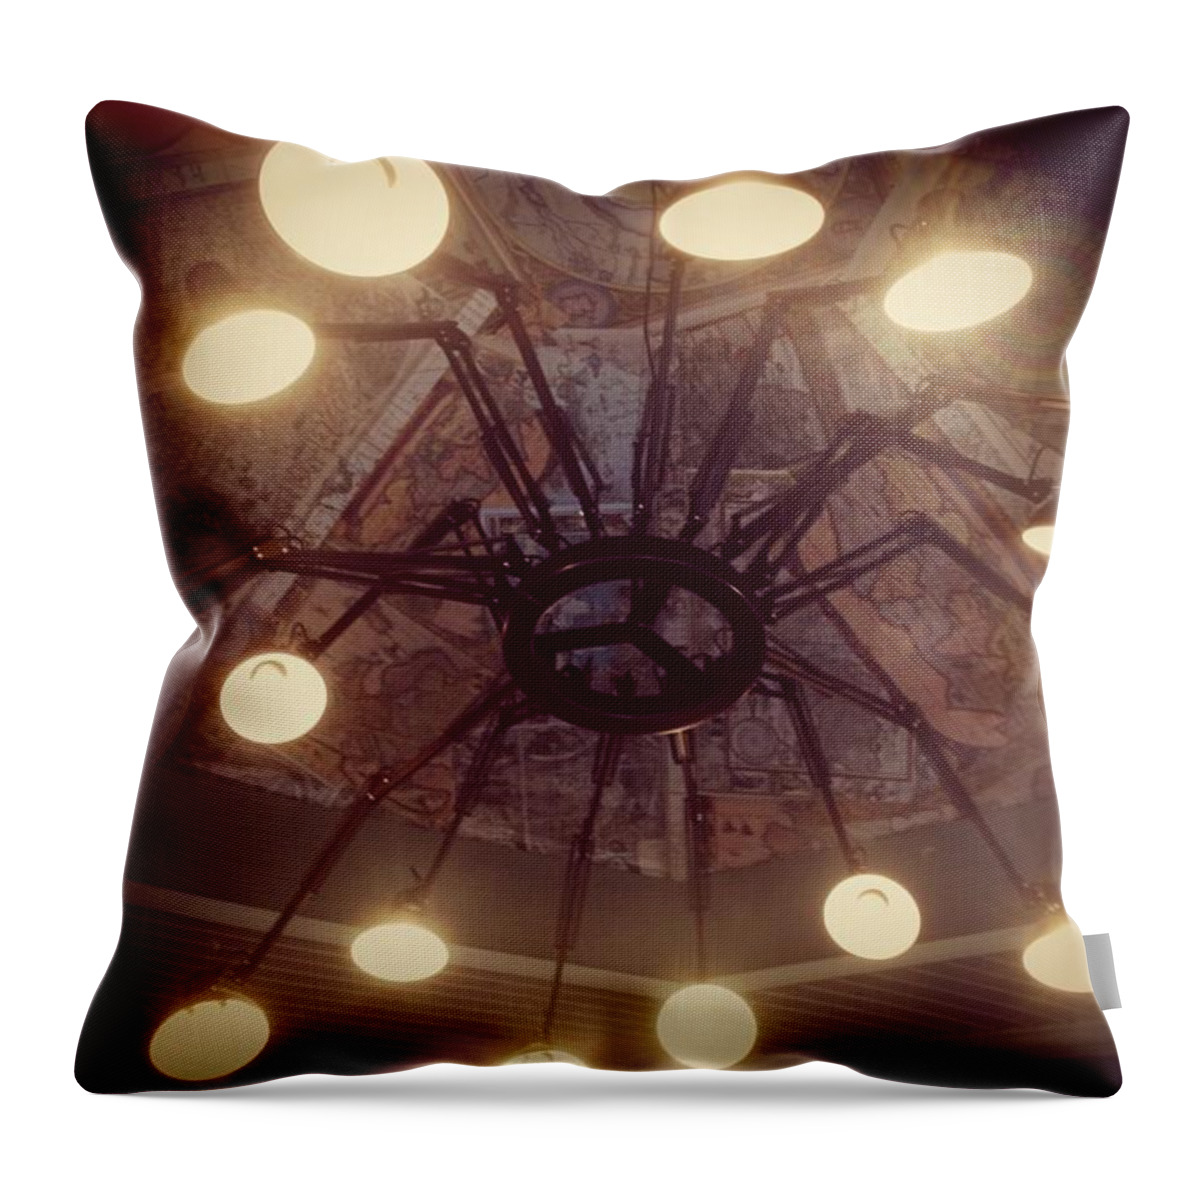  Throw Pillow featuring the photograph Amazing Ceiling! by Michael Comerford